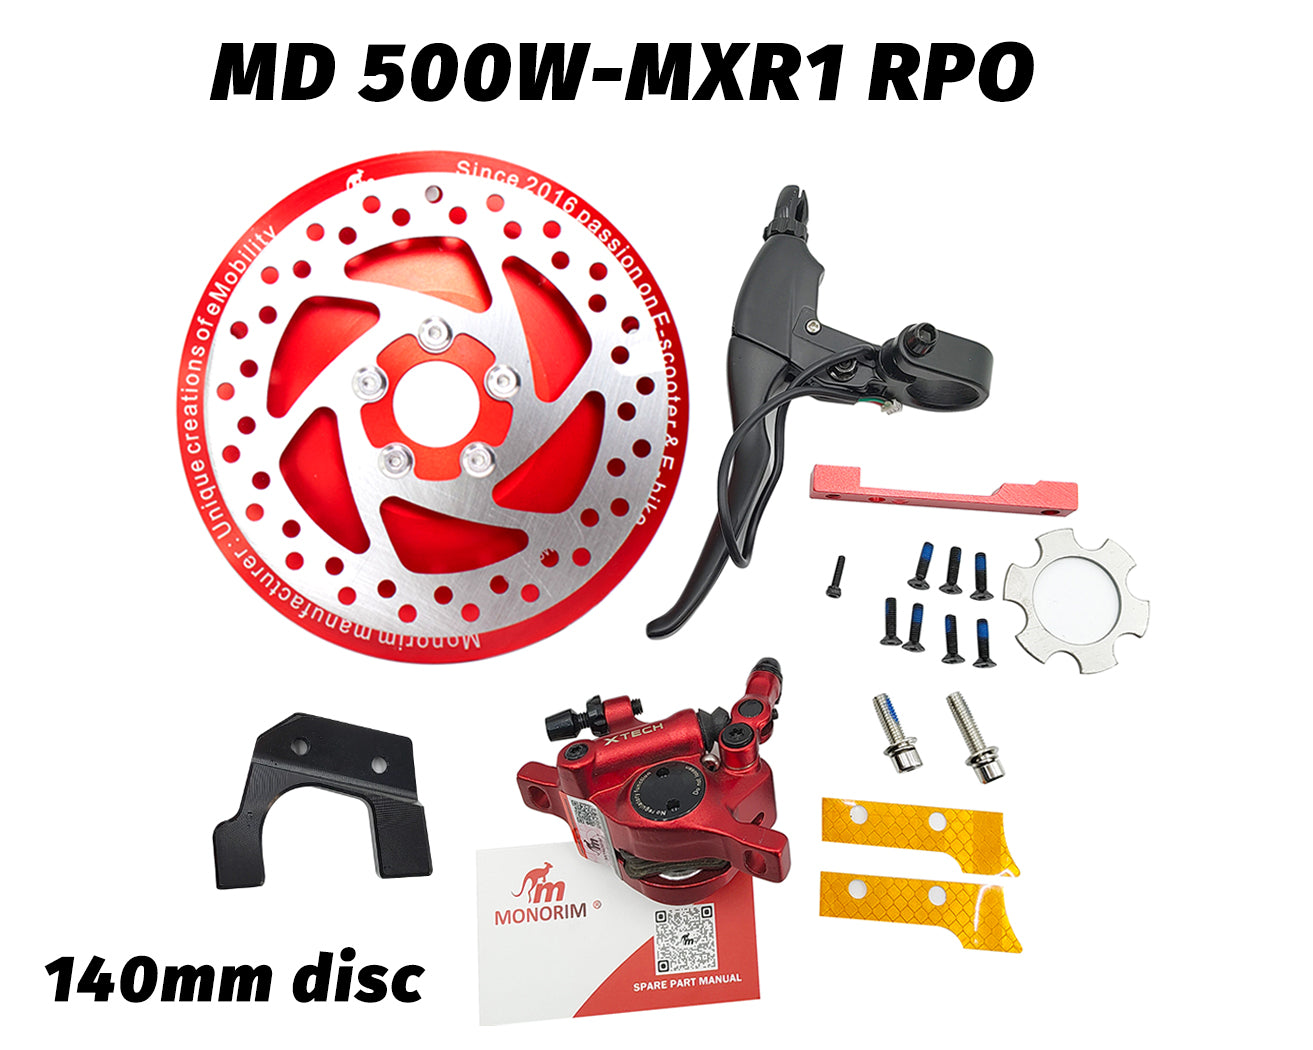 MONORIM MD-MXR1 Pro Xtech Disc Brake Upgrade Parts for Segway Ninebot Scooter Max G30 Series, 140mm for Rear Motor with MXR1